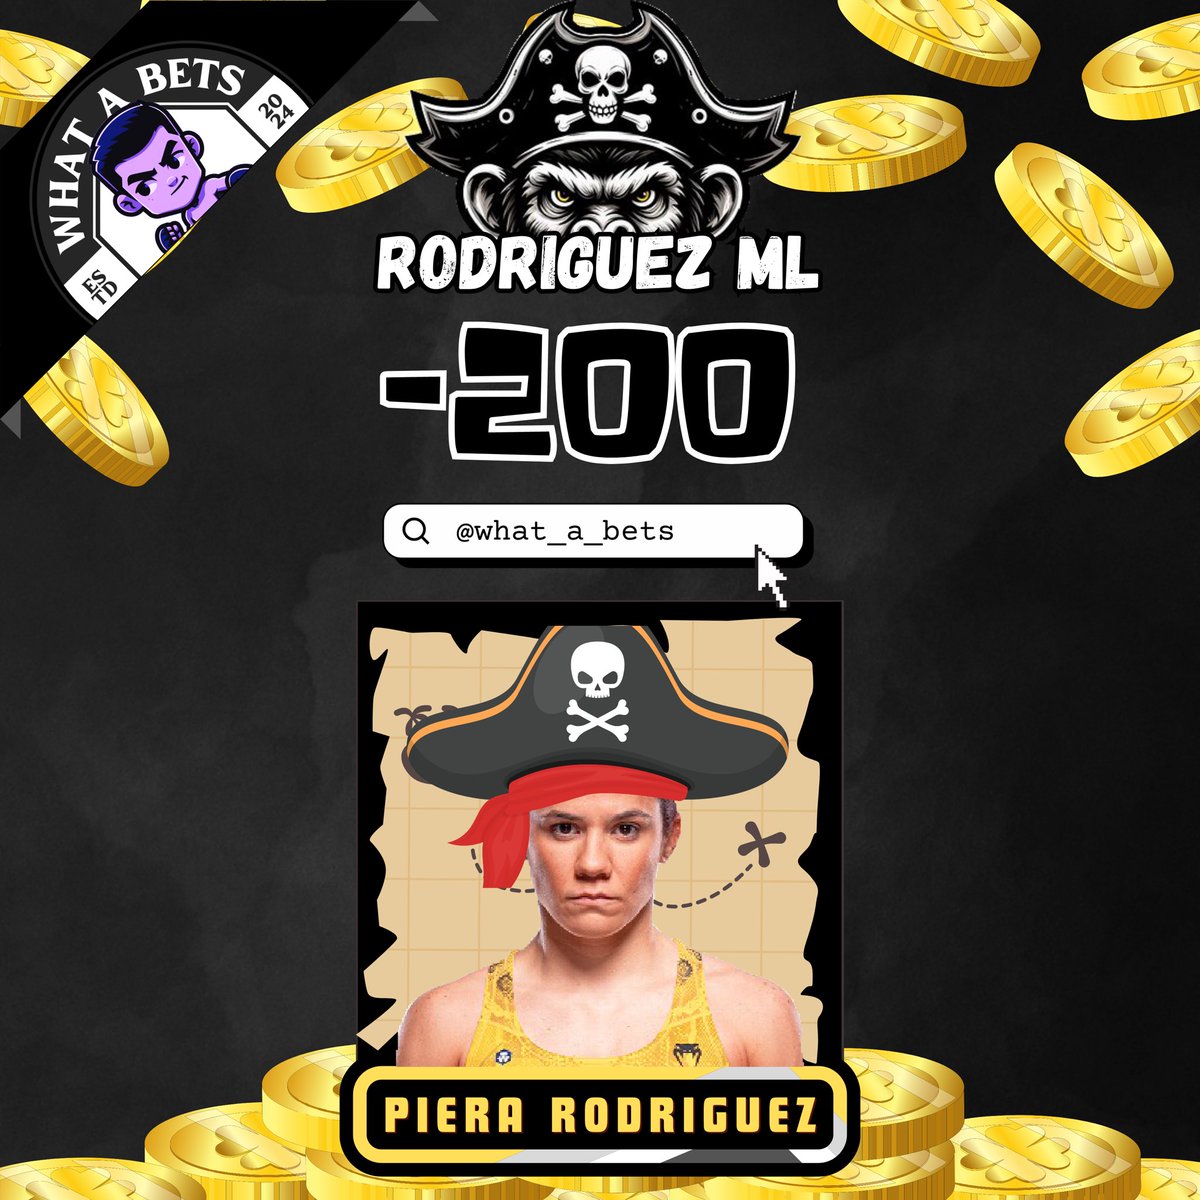 Pot O’ Gold for #UFCVegas92 is Piera Rodriguez!!!! 🏴‍☠️⭐️🏴‍☠️⭐️
Looking to bounce back after the loss last week, Piera is the perfect fighter to get us back on track! 🐵🏴‍☠️🐵🏴‍☠️
#UFC #bets #FREEBET #freediego #MoneyManagement #MMA